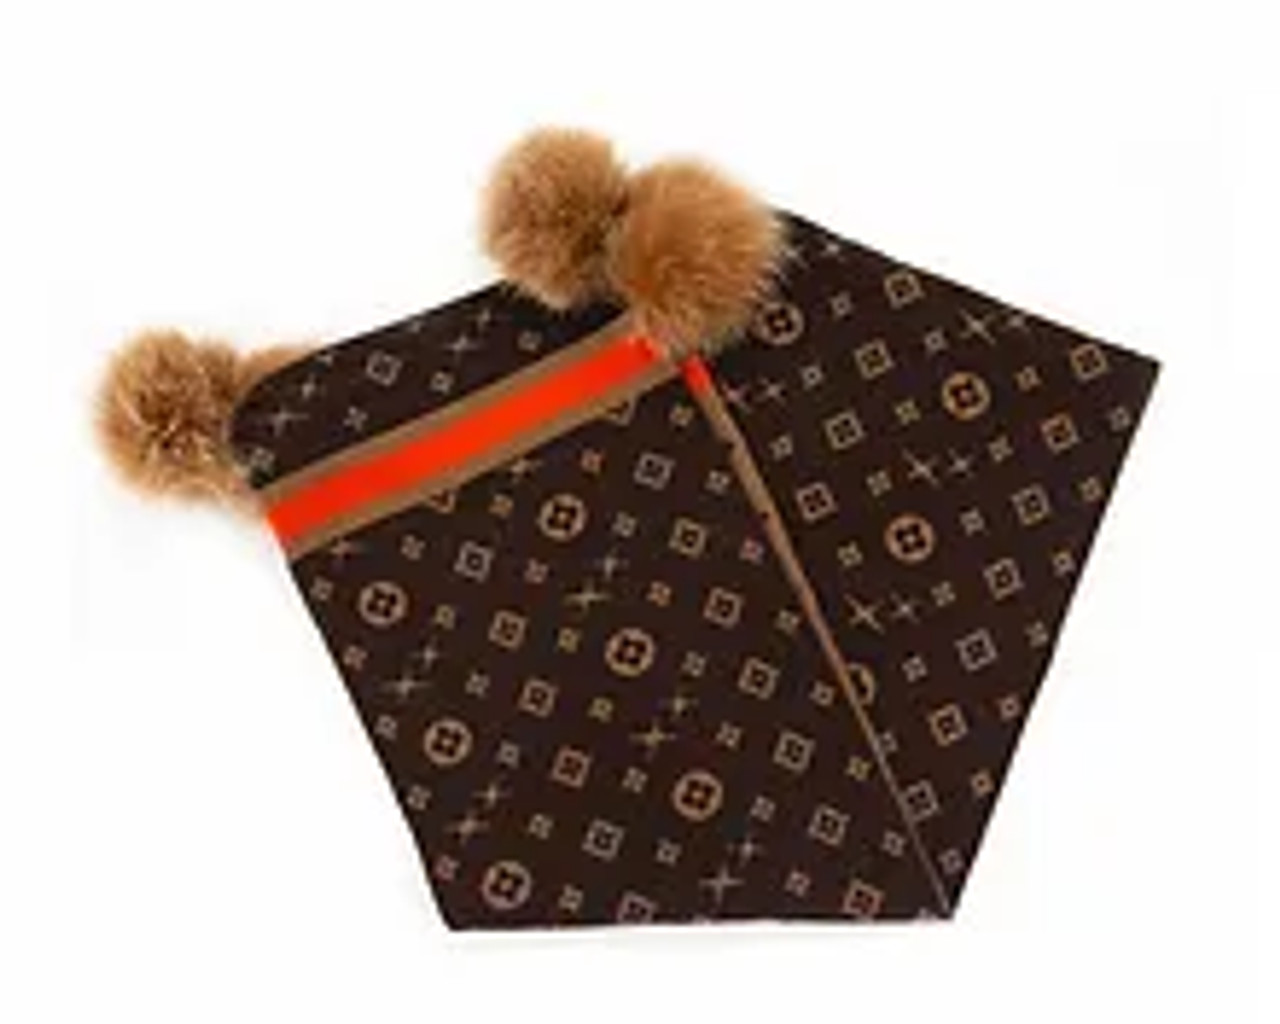 Assorted Wool Louis Vuitton-Inspired Scarf with Fox Pom-Pom